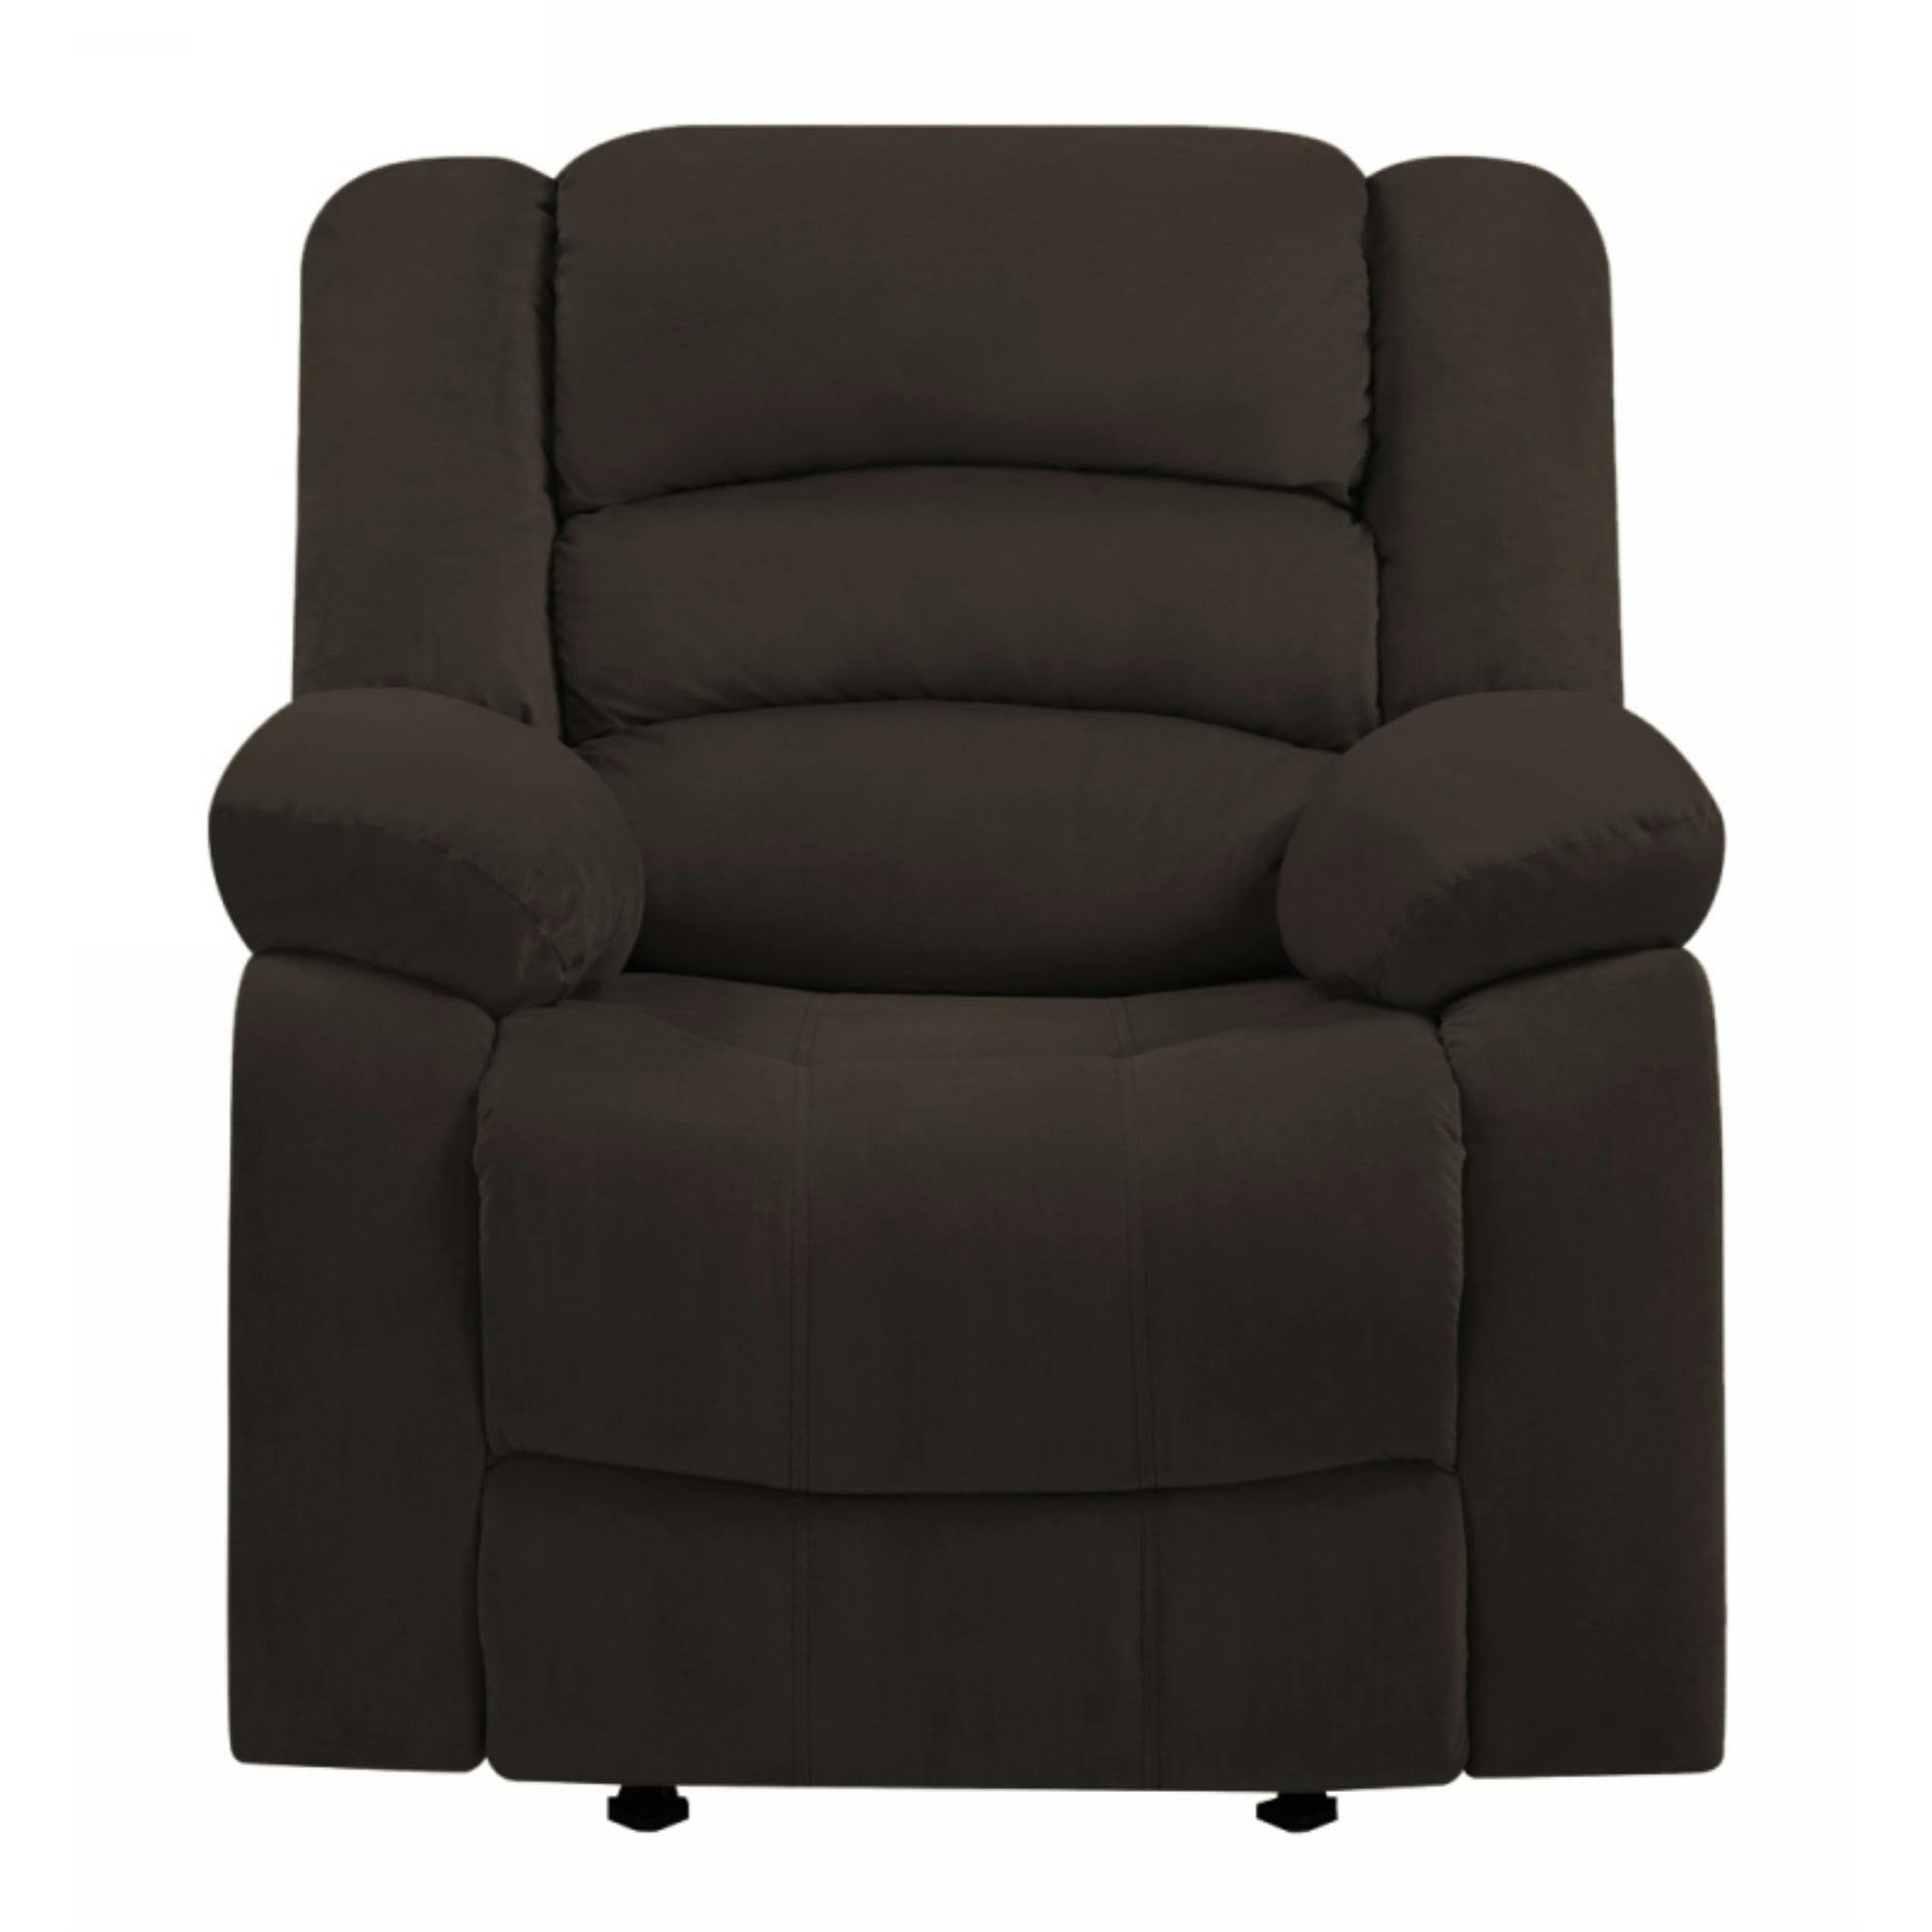 Contemporary Brown Microfiber Recliner Chair - 40" Height